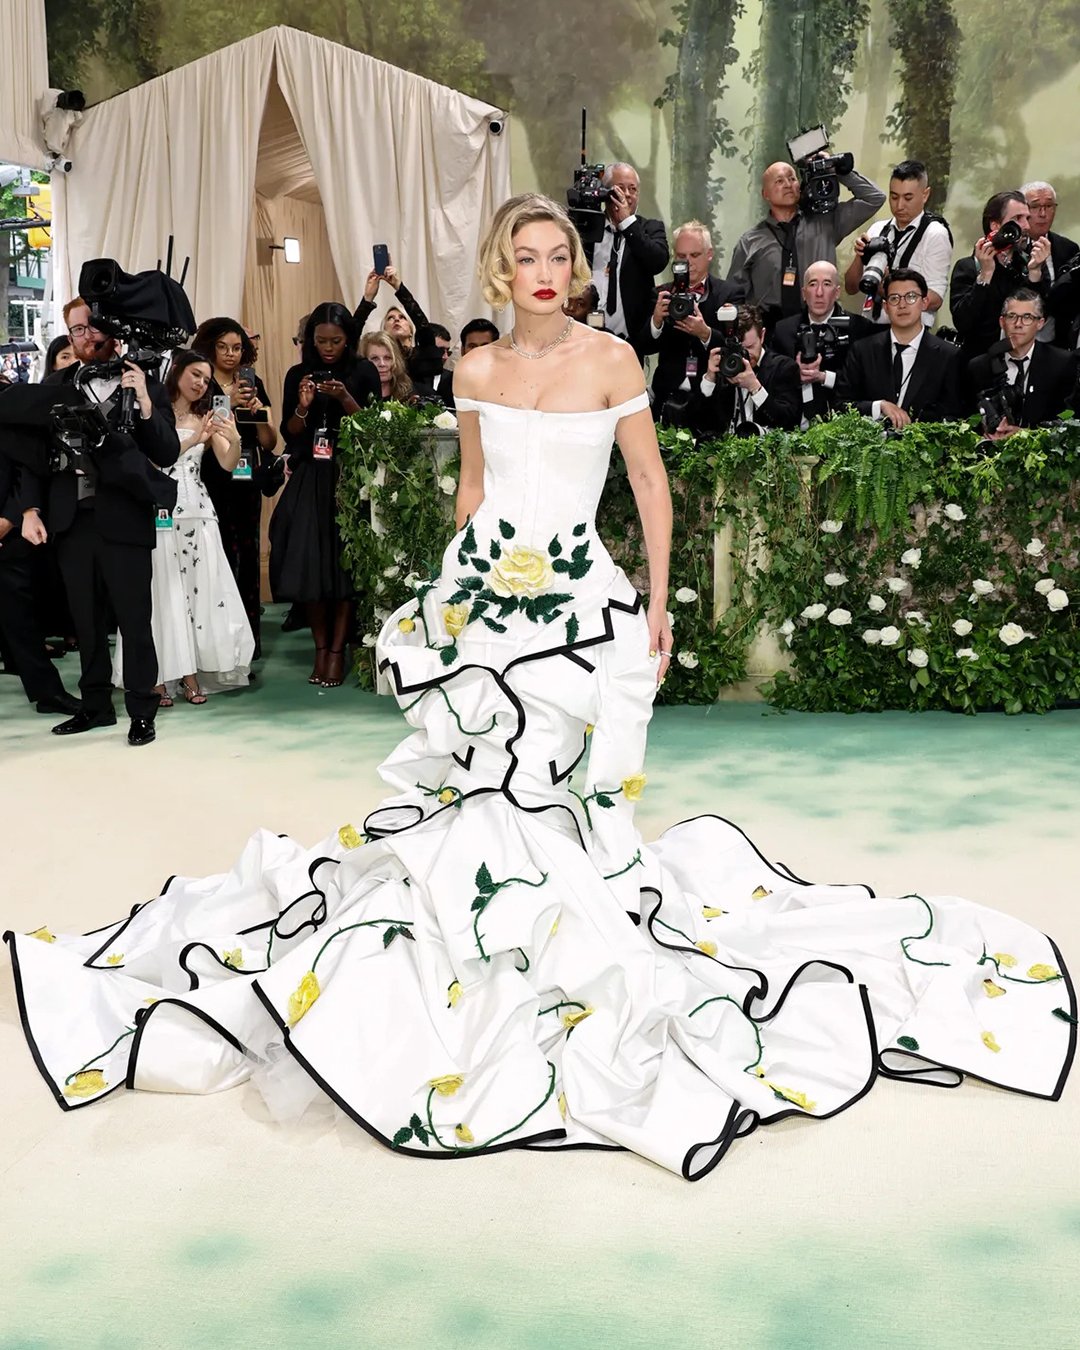 💫 What's your take on this year's Met Gala looks? Here are a few of our top picks! Which one was your favorite? ✨ #MetGalaFashion #SleepingBeauties #Gardenoftime #MetGala #FashionDesign